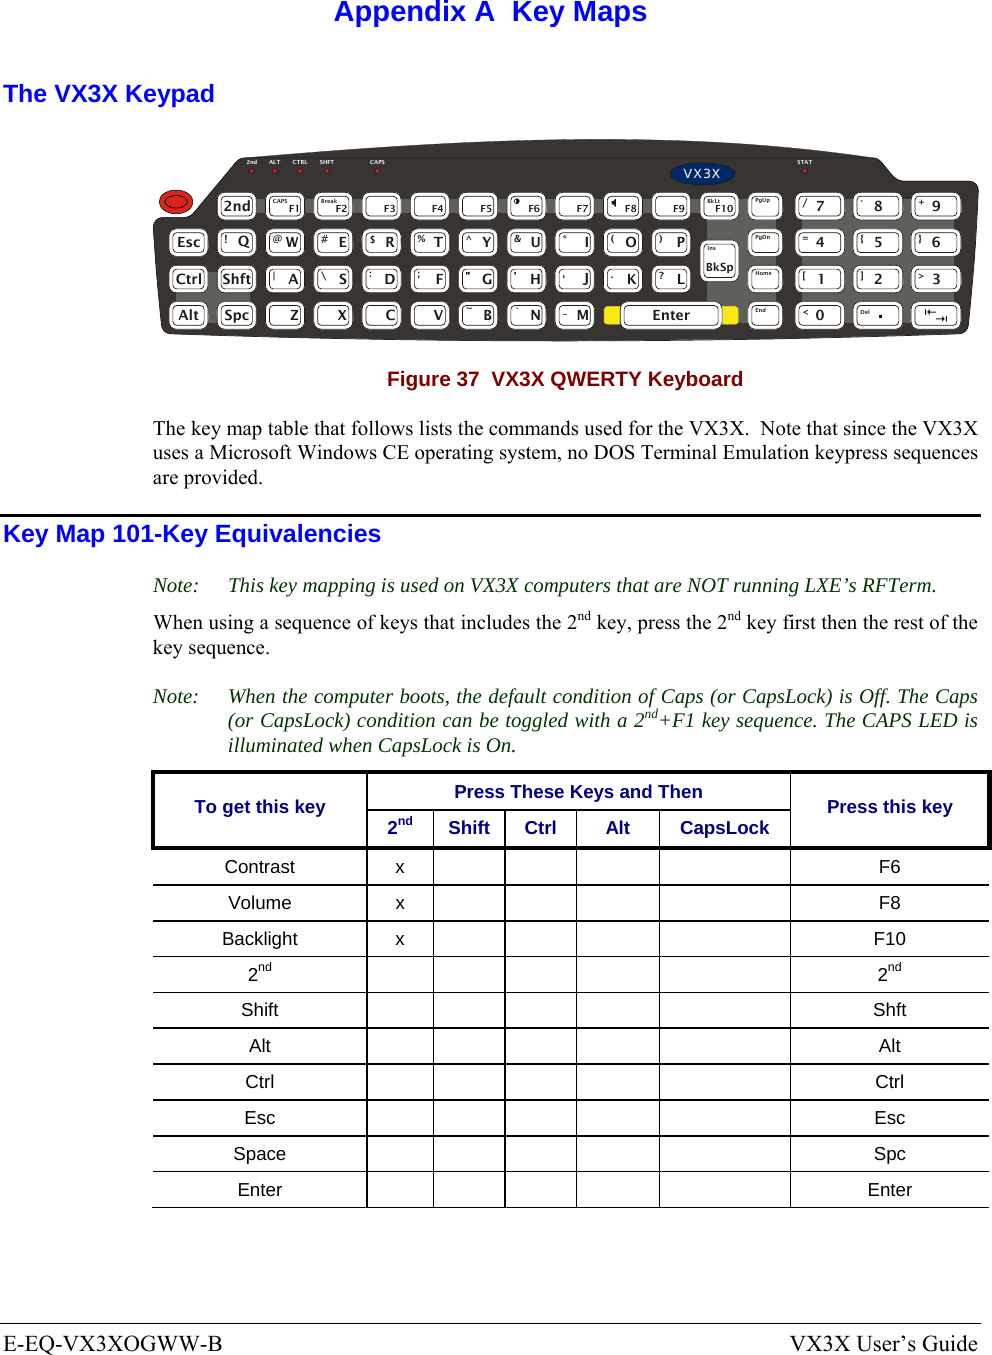  E-EQ-VX3XOGWW-B  VX3X User’s Guide  Appendix A  Key Maps The VX3X Keypad WERTYUIO PASDFGH JKLZXCVBNMQ!@#$%^&amp;*()|\:; ,.?EscCtrlAltShftSpc2nd~`_EnterPgUpPgDnHomeEnd7894561230/-+={}[]&gt;&lt;DelInsBkSpBkLtBreakCAPSF1 F2 F3 F4 F5 F6 F7 F8 F9 F10ٛٛٛٛ2nd ALT CTRL SHFT CAPS STATVX3X Figure 37  VX3X QWERTY Keyboard The key map table that follows lists the commands used for the VX3X.  Note that since the VX3X uses a Microsoft Windows CE operating system, no DOS Terminal Emulation keypress sequences are provided. Key Map 101-Key Equivalencies Note:  This key mapping is used on VX3X computers that are NOT running LXE’s RFTerm. When using a sequence of keys that includes the 2nd key, press the 2nd key first then the rest of the key sequence.  Note:  When the computer boots, the default condition of Caps (or CapsLock) is Off. The Caps (or CapsLock) condition can be toggled with a 2nd+F1 key sequence. The CAPS LED is illuminated when CapsLock is On. Press These Keys and Then To get this key  2nd Shift Ctrl  Alt  CapsLock  Press this key Contrast x       F6 Volume x       F8 Backlight x       F10 2nd       2nd Shift       Shft Alt       Alt Ctrl       Ctrl Esc       Esc Space       Spc Enter       Enter 